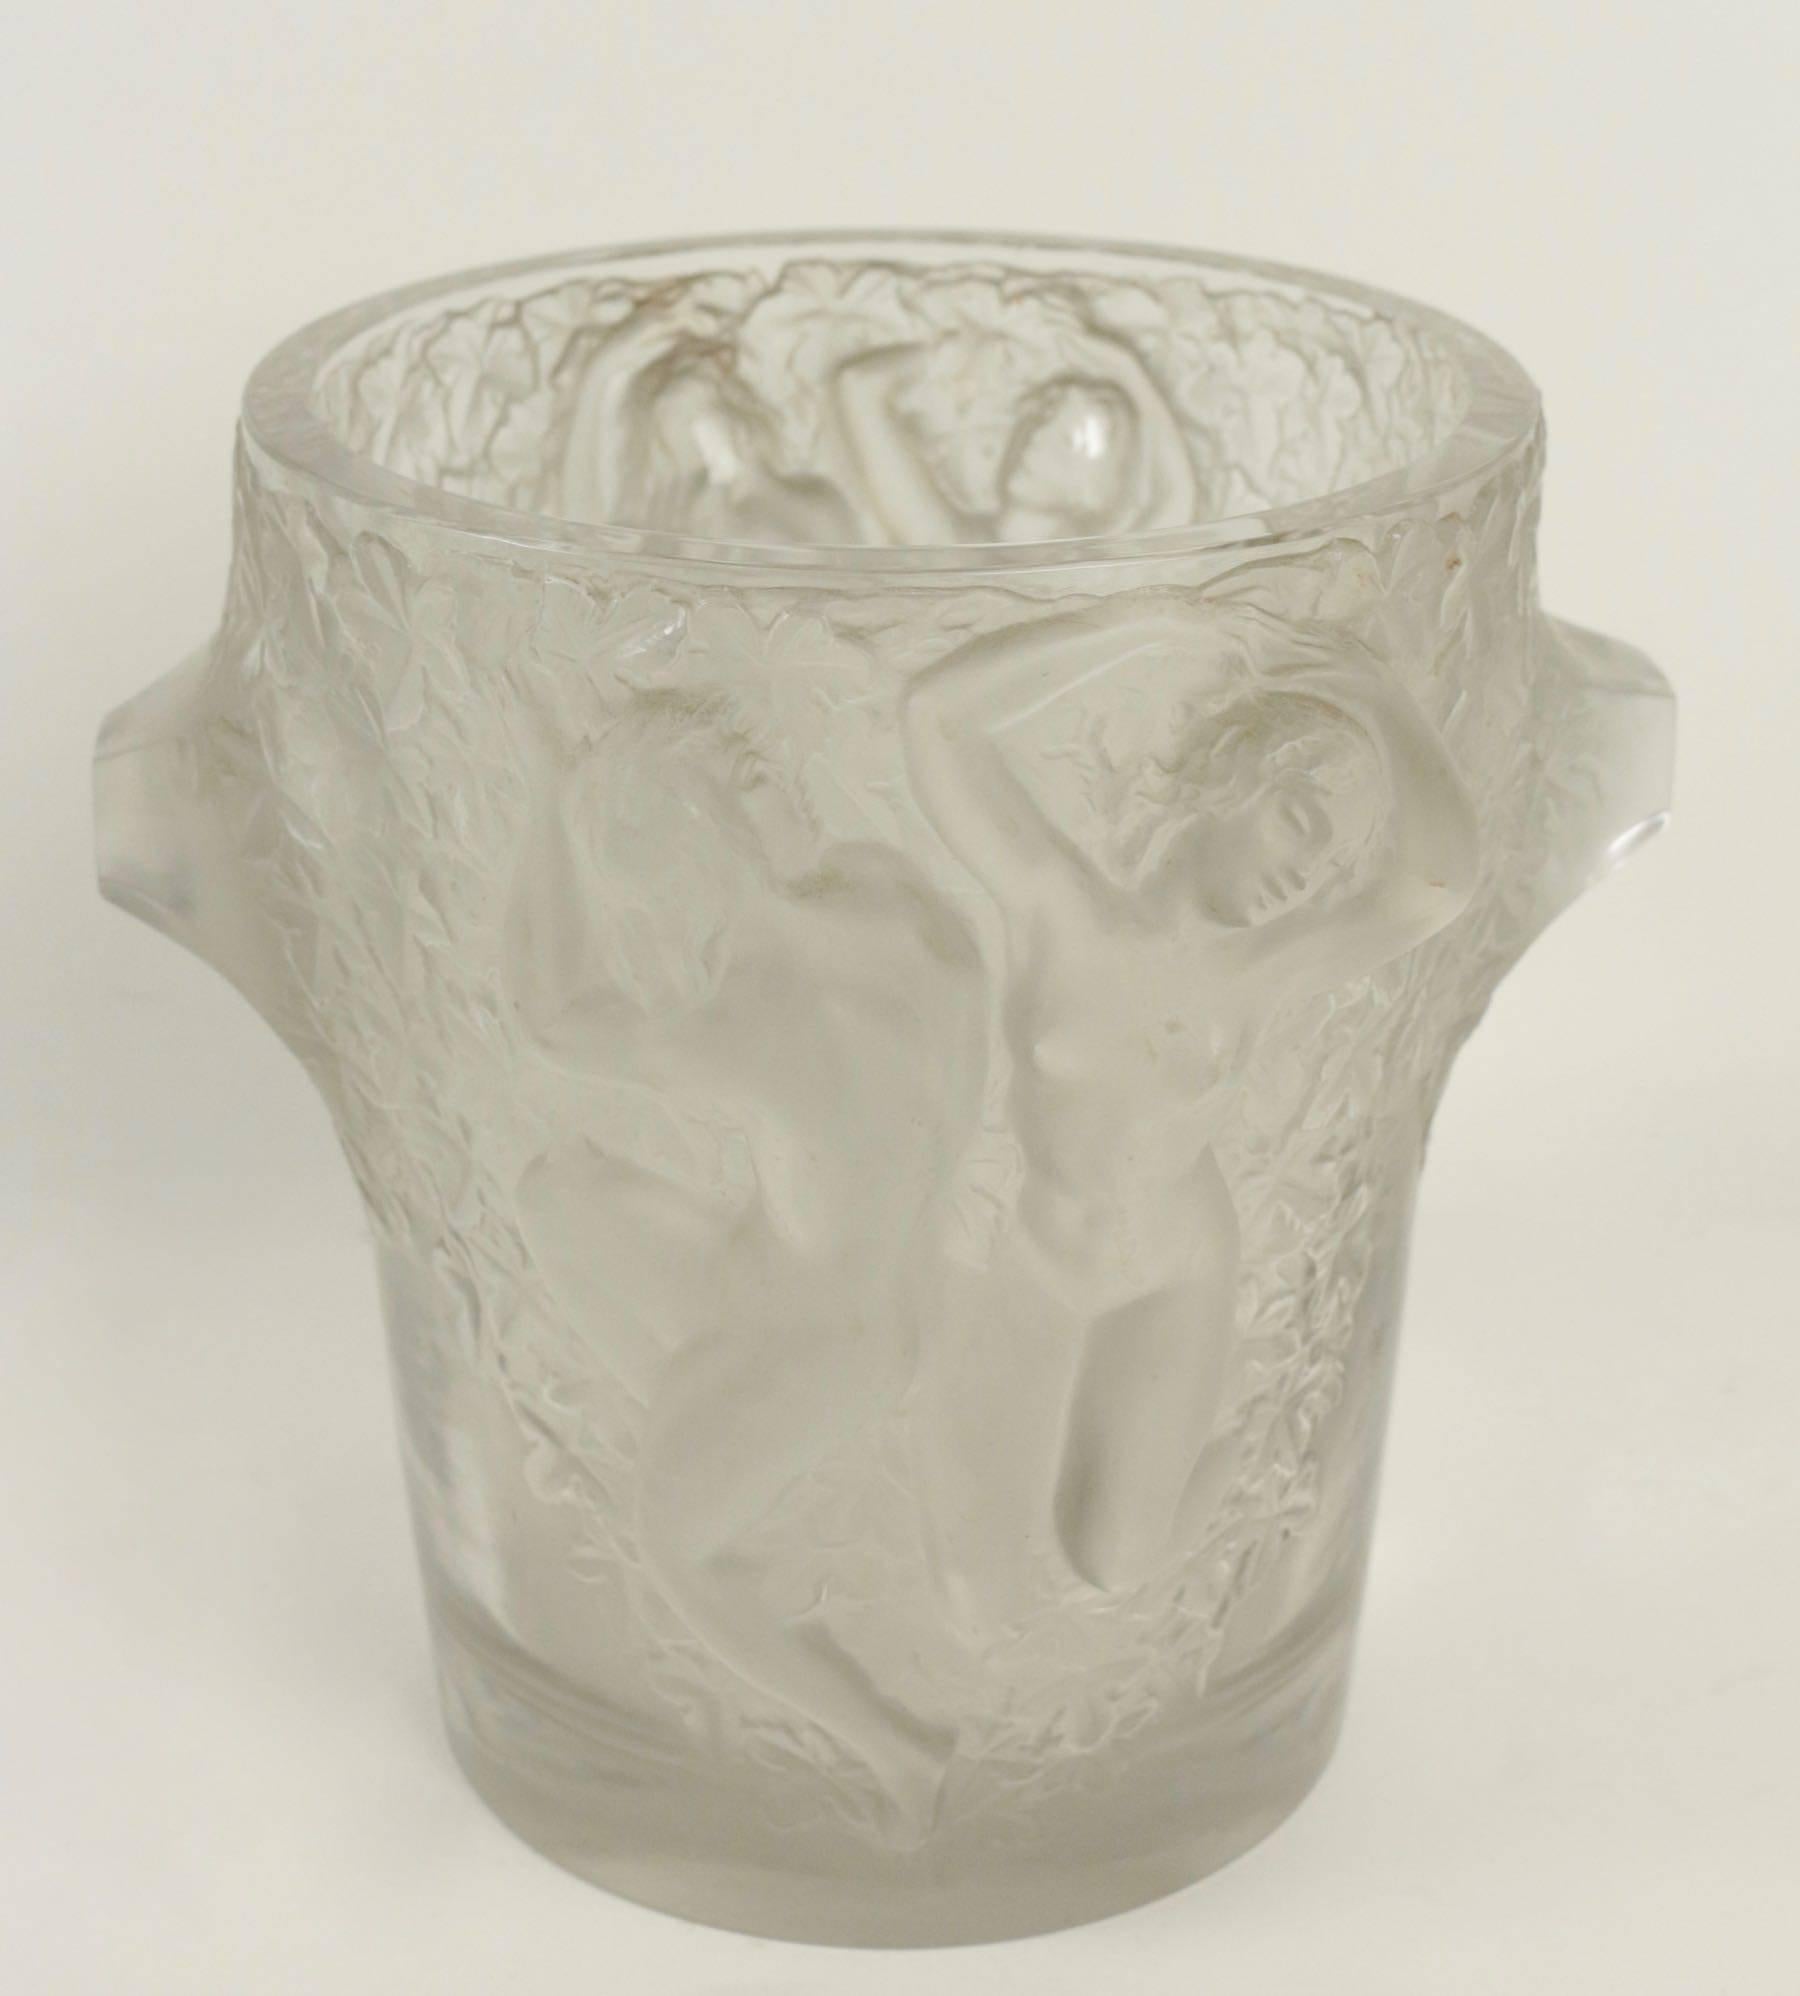 Lalique ice bucket depicting dancing female figures in high relief, circa 1938 design no. 11951. This piece is a perfect example of Lalique's Classic quest for elegant simplicity.
Signed RLalique France on bottom. Measures: 9 1/8